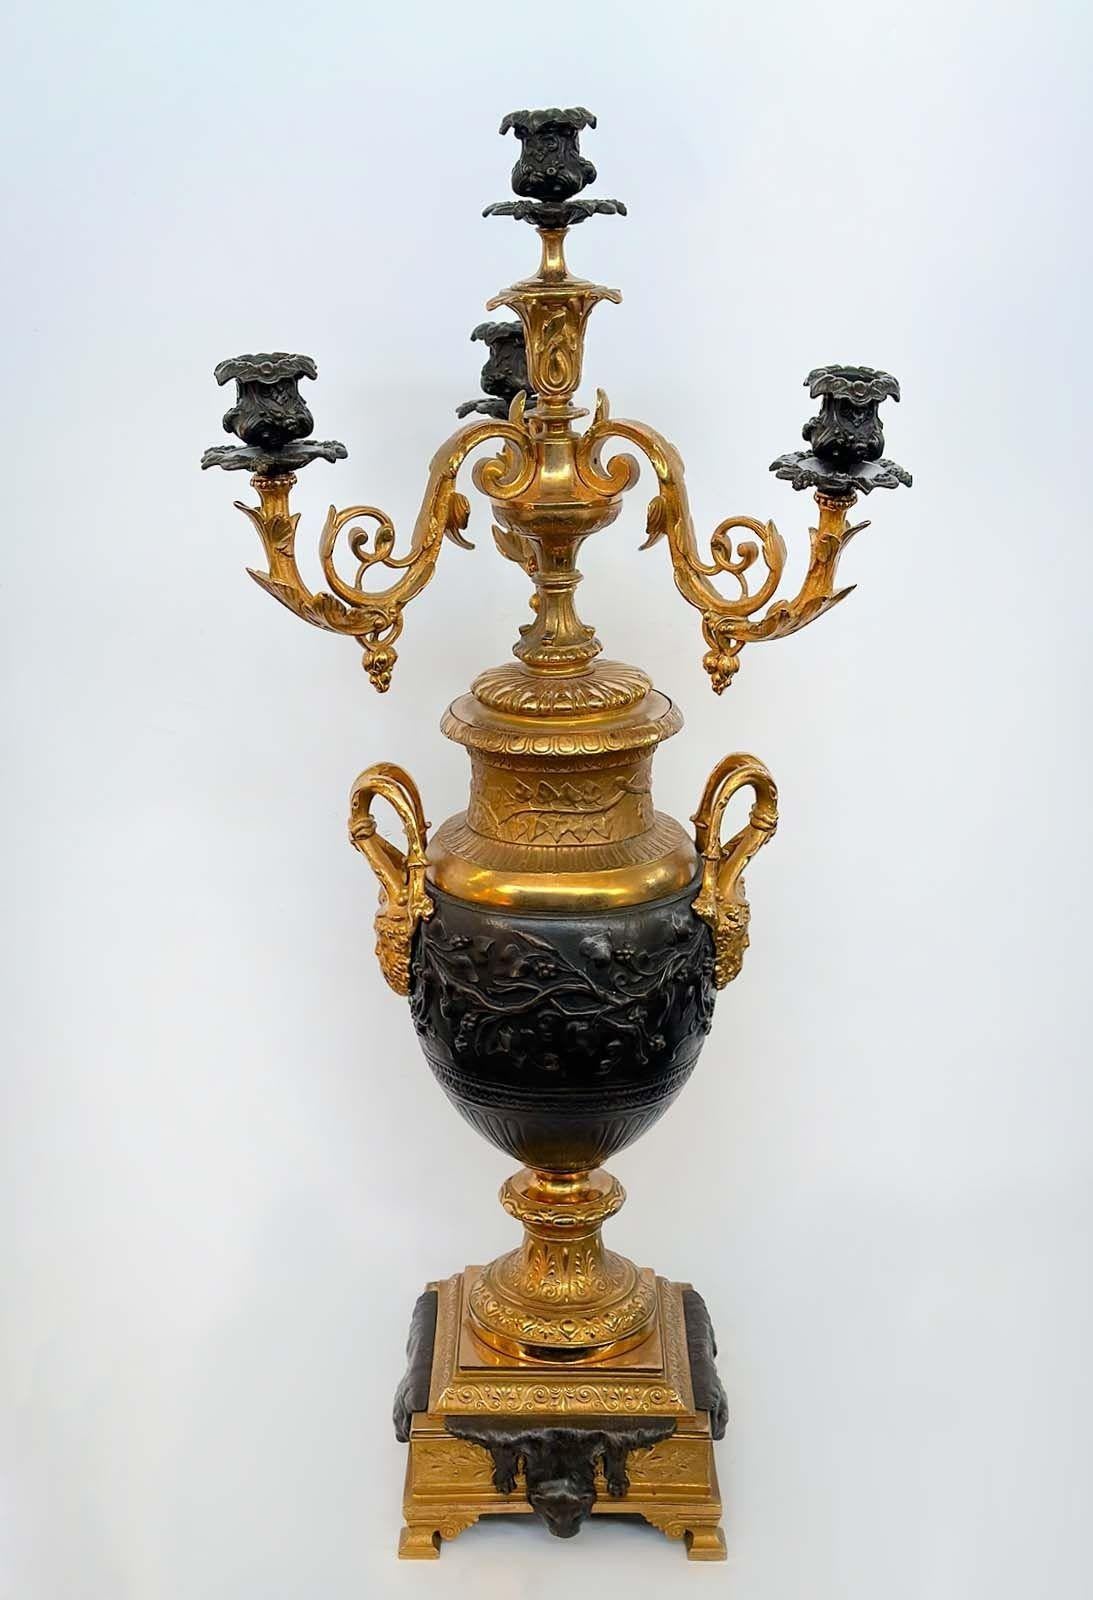 Pair of gilt and patinated bronze four light candelabras in the style of Napoleon III. Made in France, Late 19th Century. Delicately crafted providing a sense of allure to any room.
Dimensions:
29.25